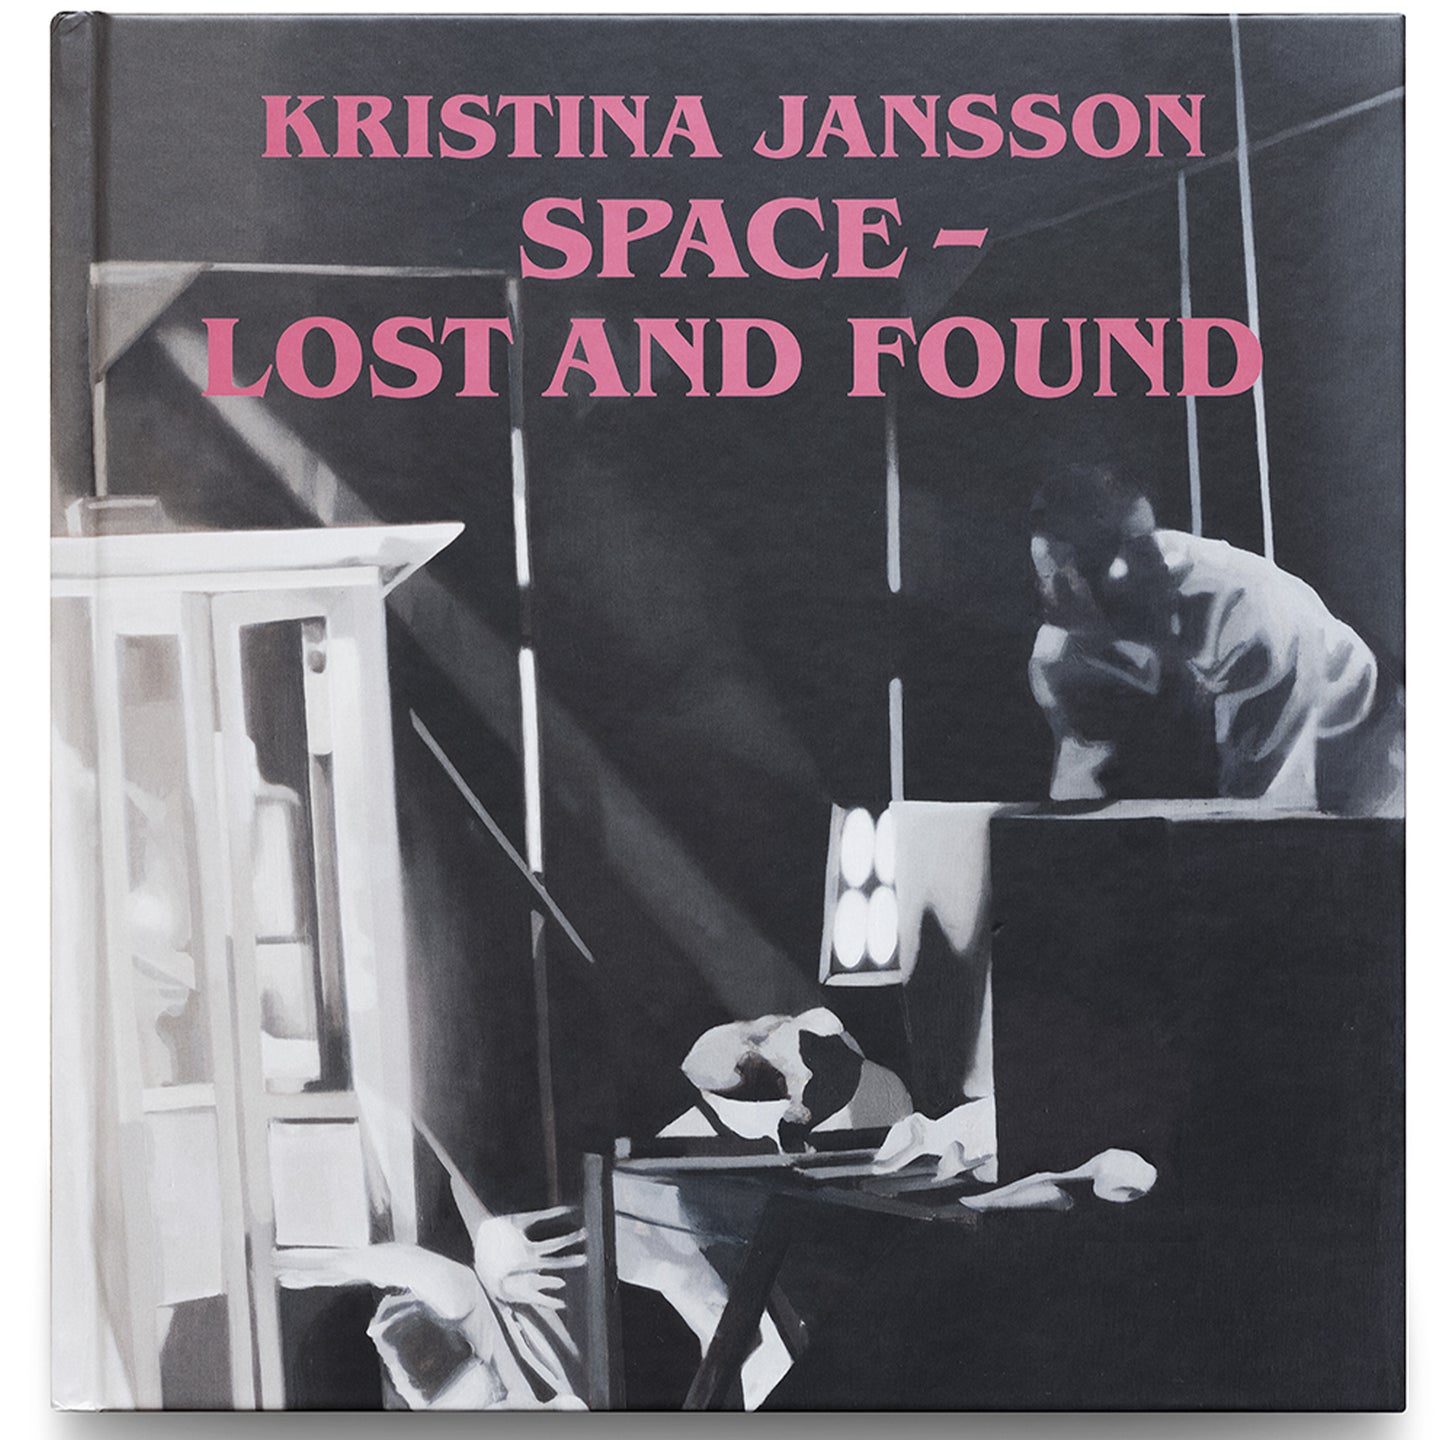 KRISTINA JANSSON: SPACE - LOST AND FOUND